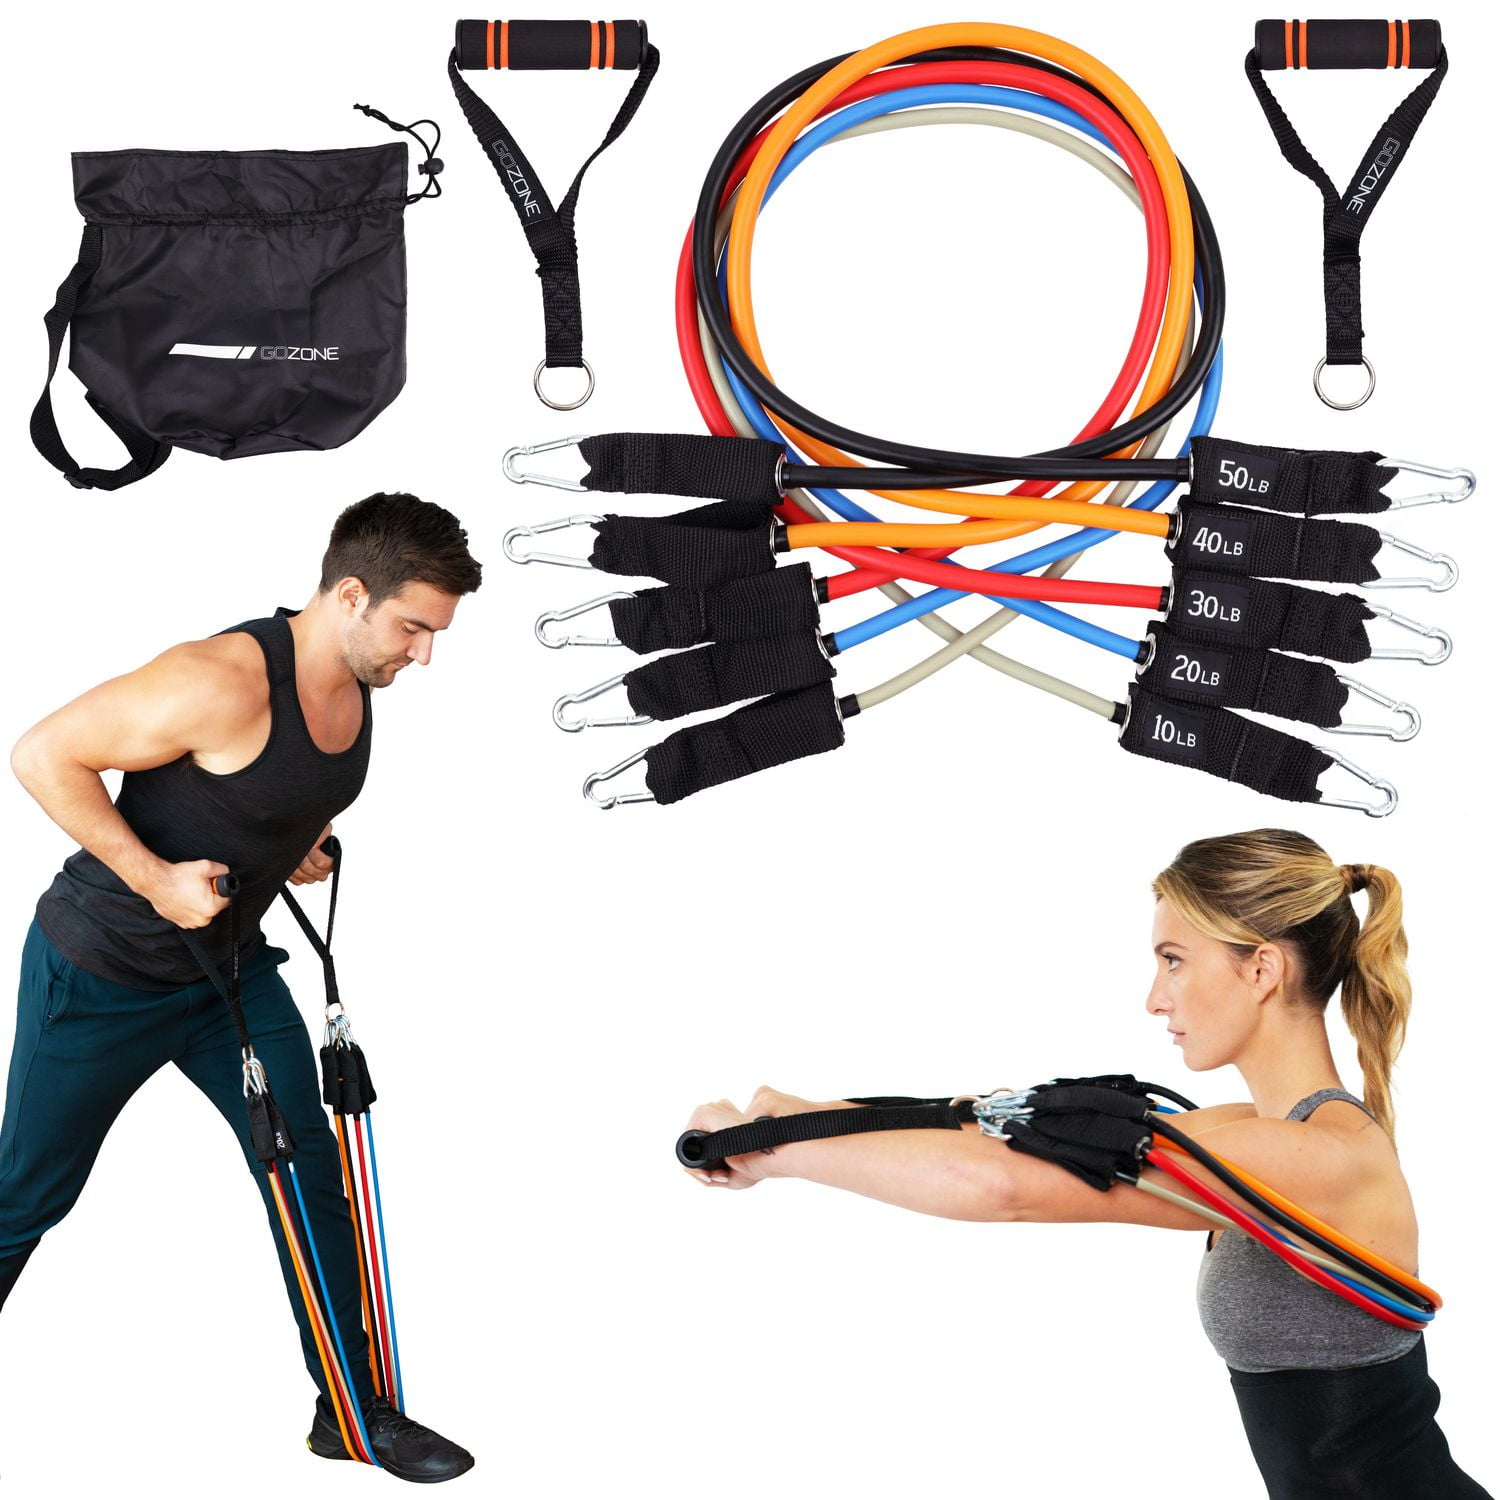 GoZone All-in-One Resistance Band Set – Multi-Colour, Includes